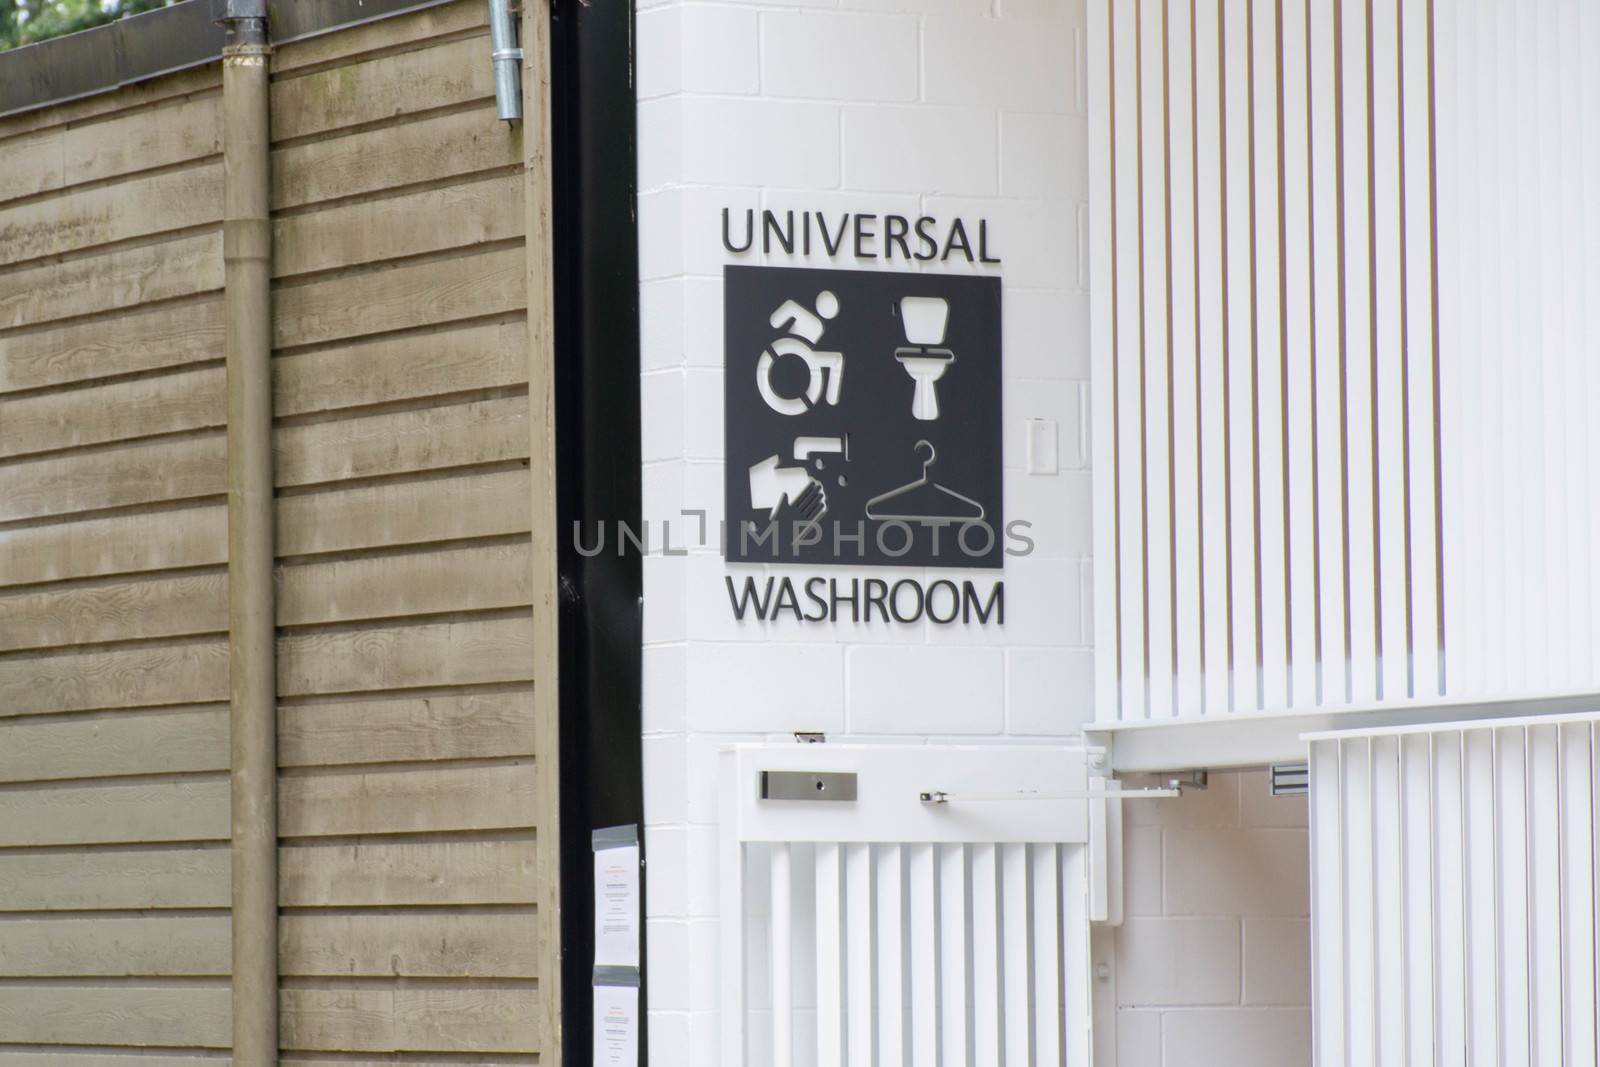 Universal bathroom or washroom sign in a public park in Canada. A controversial topic surrounding transgender rights and issues.